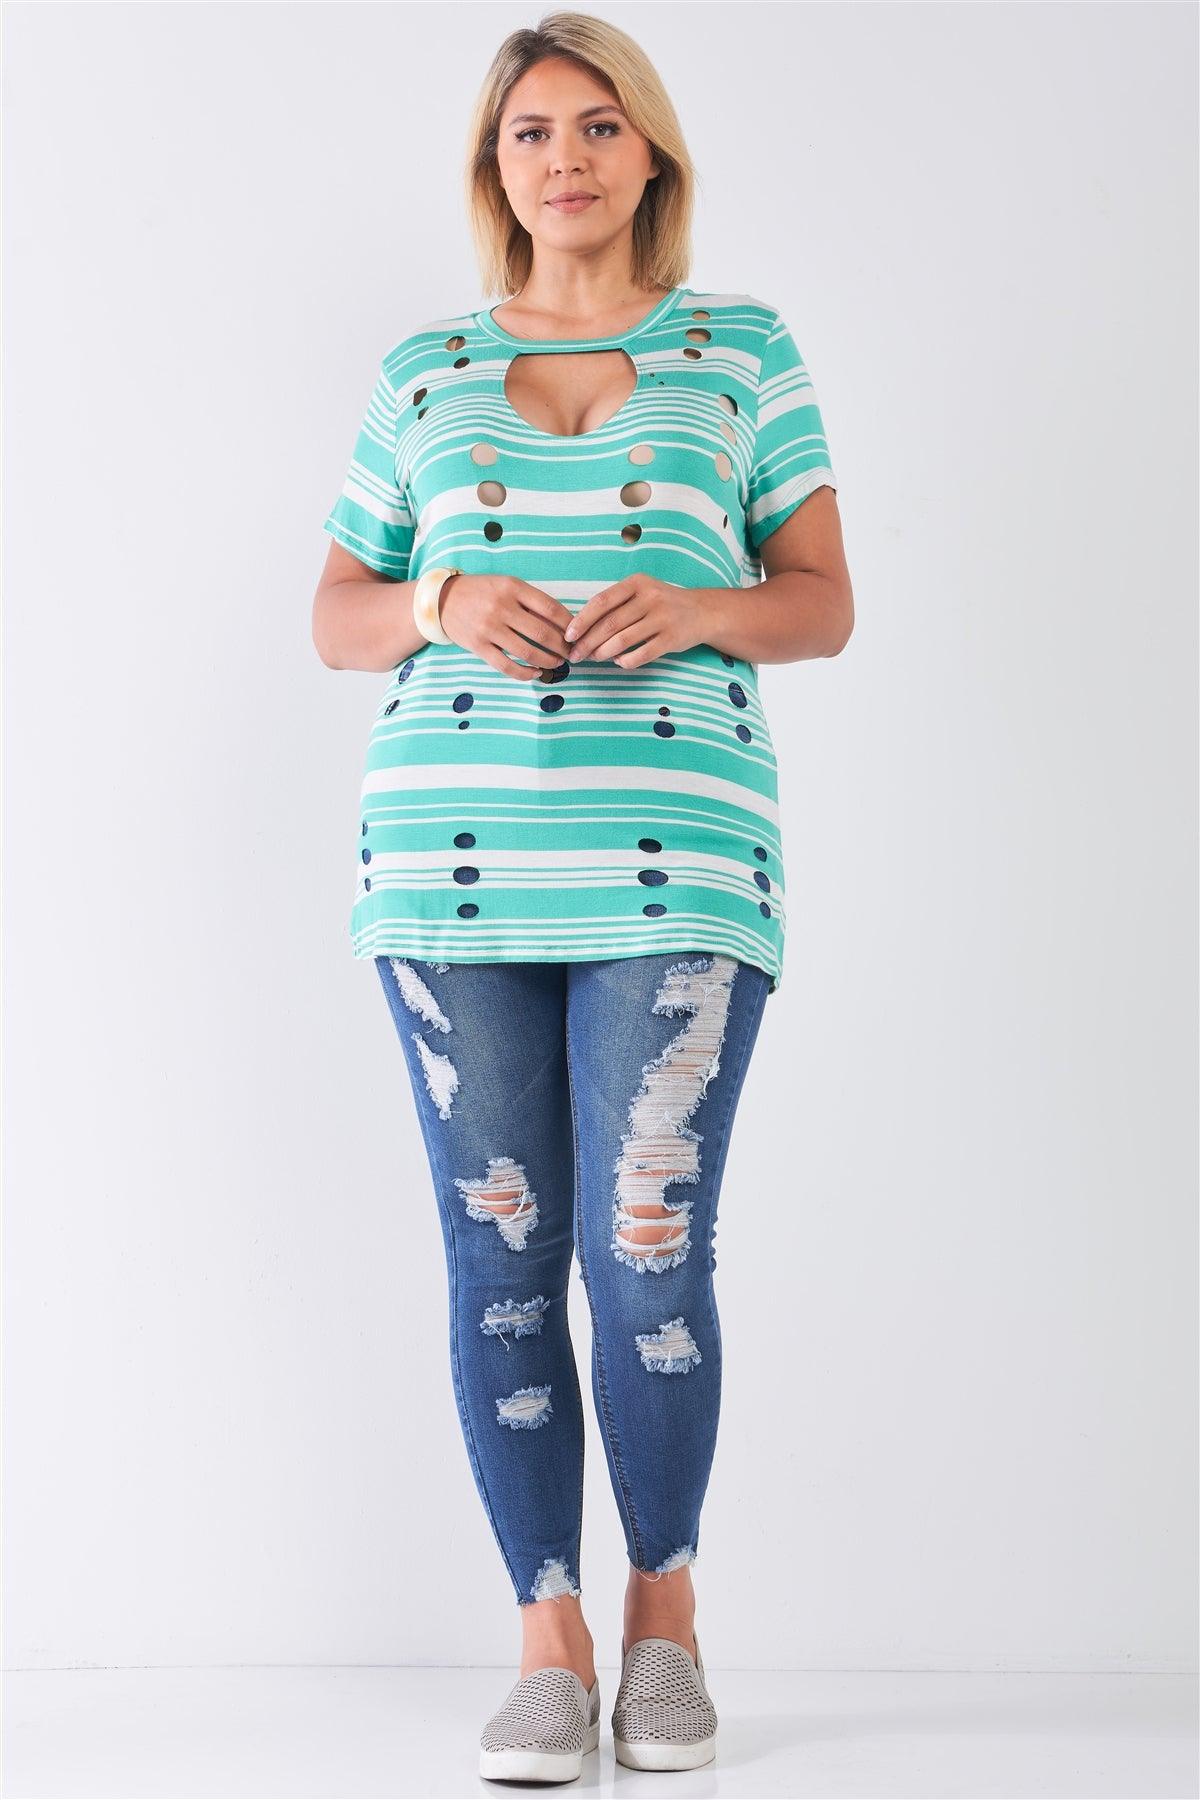 Junior Plus Size Mint Striped and Distressed Cut-Out Top /2-2-2